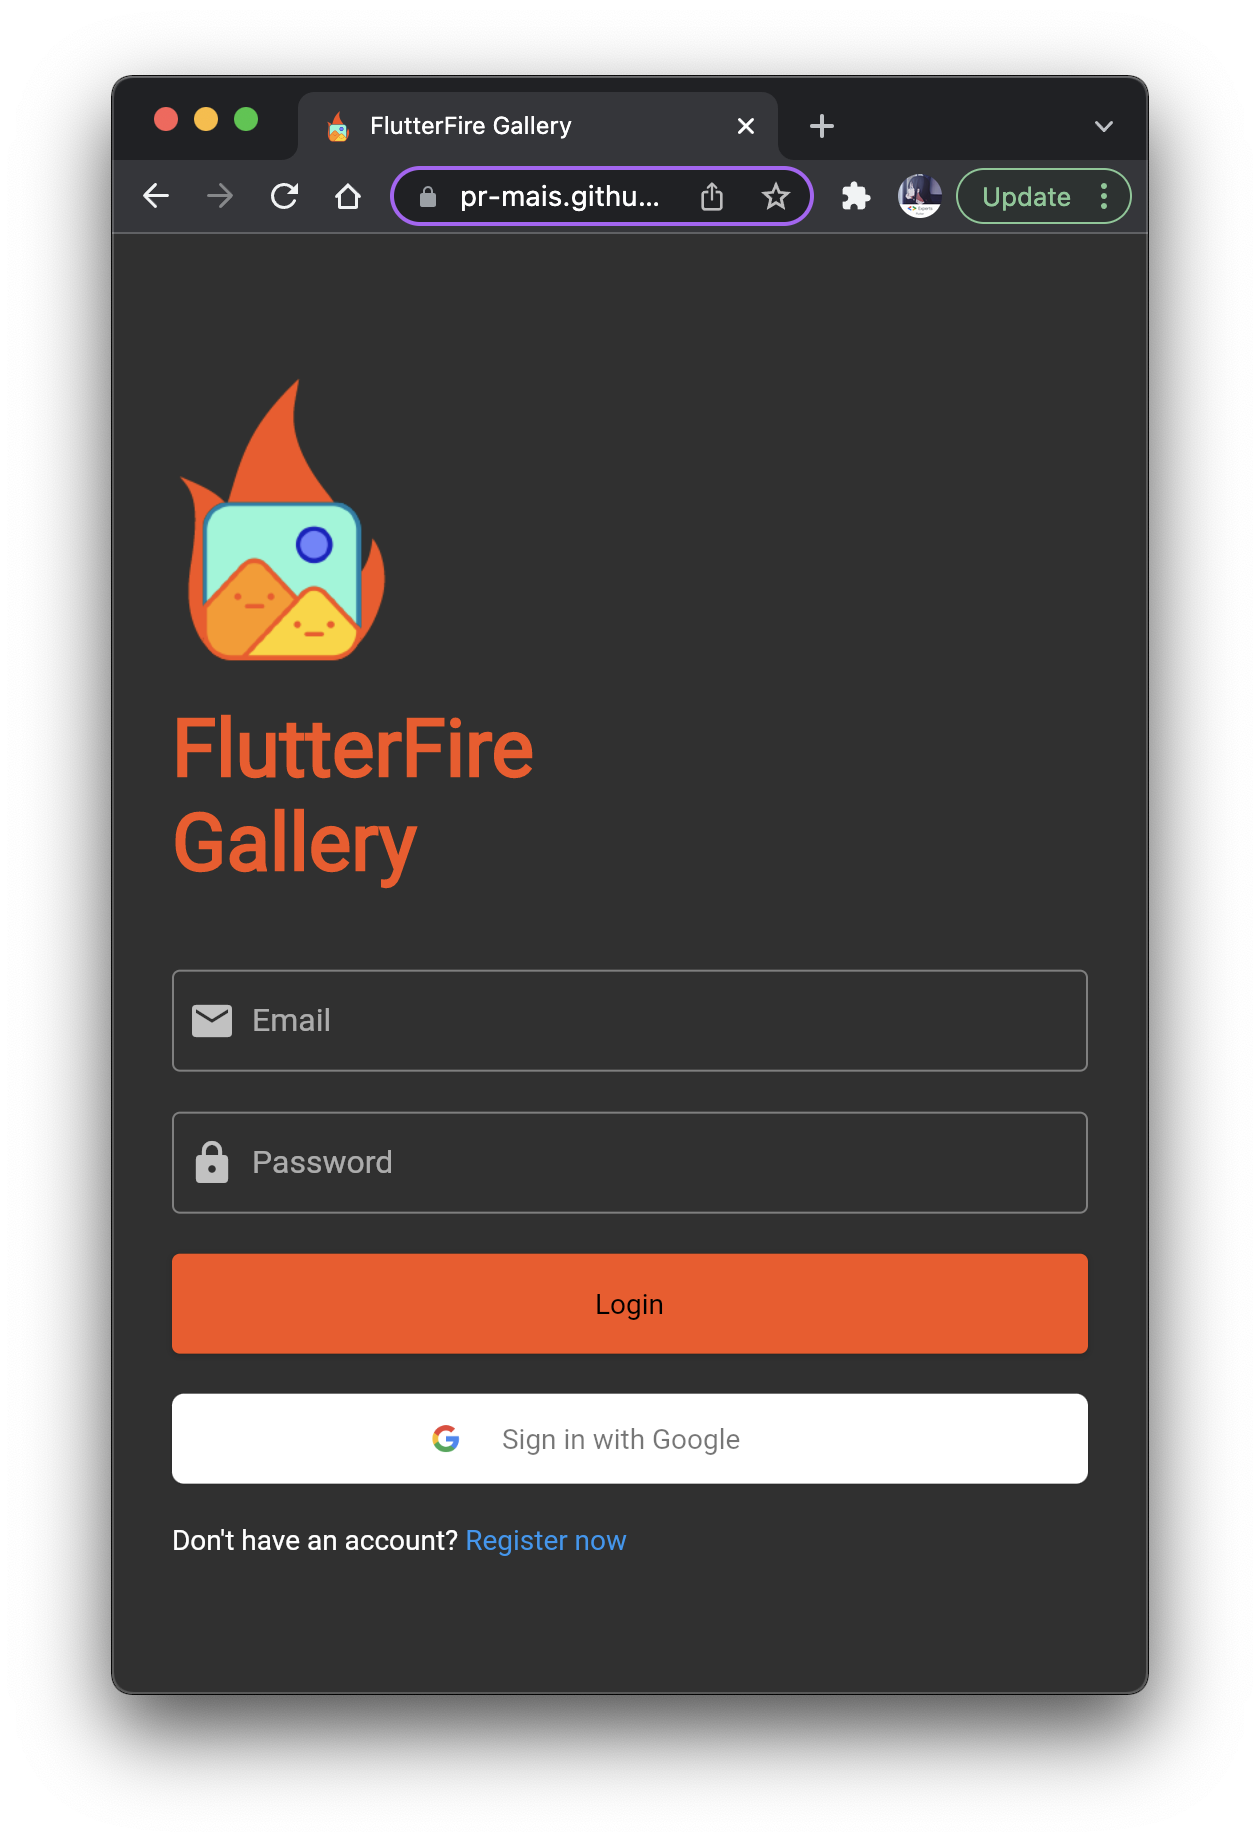 A sample application that allows a user to upload and share images, made with Flutter and Firebase